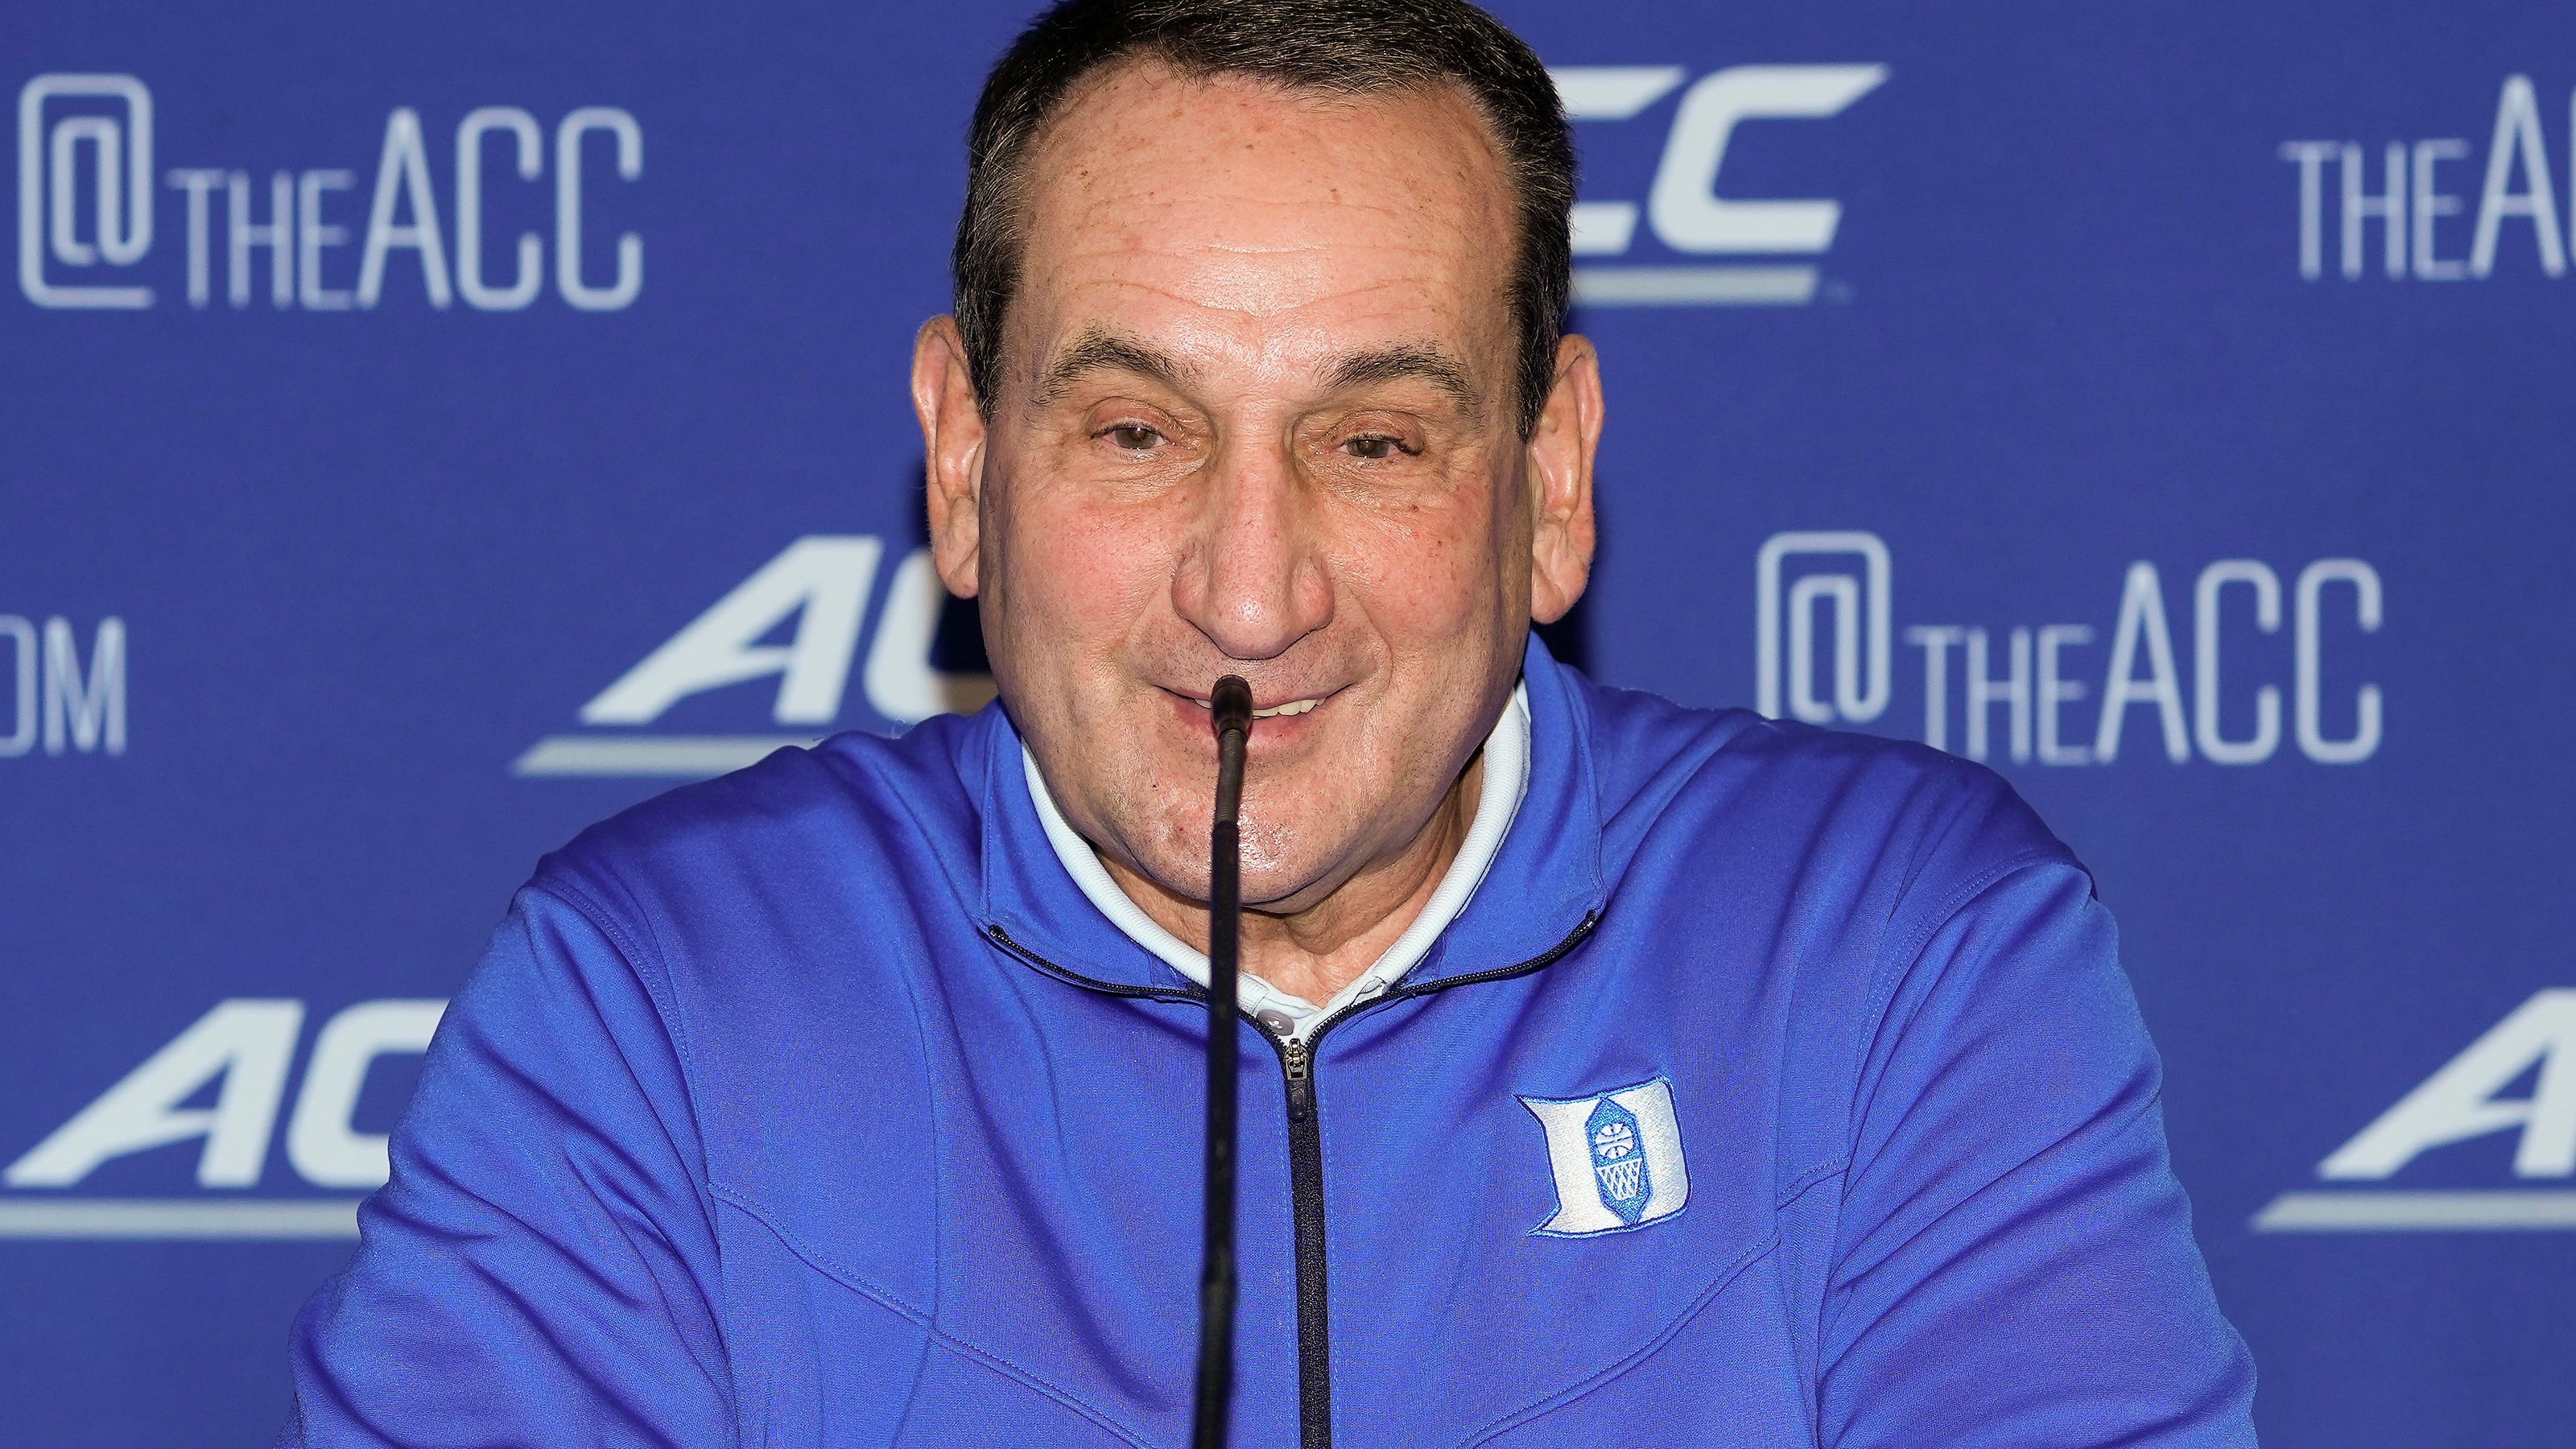 ACC Tipoff top quotes